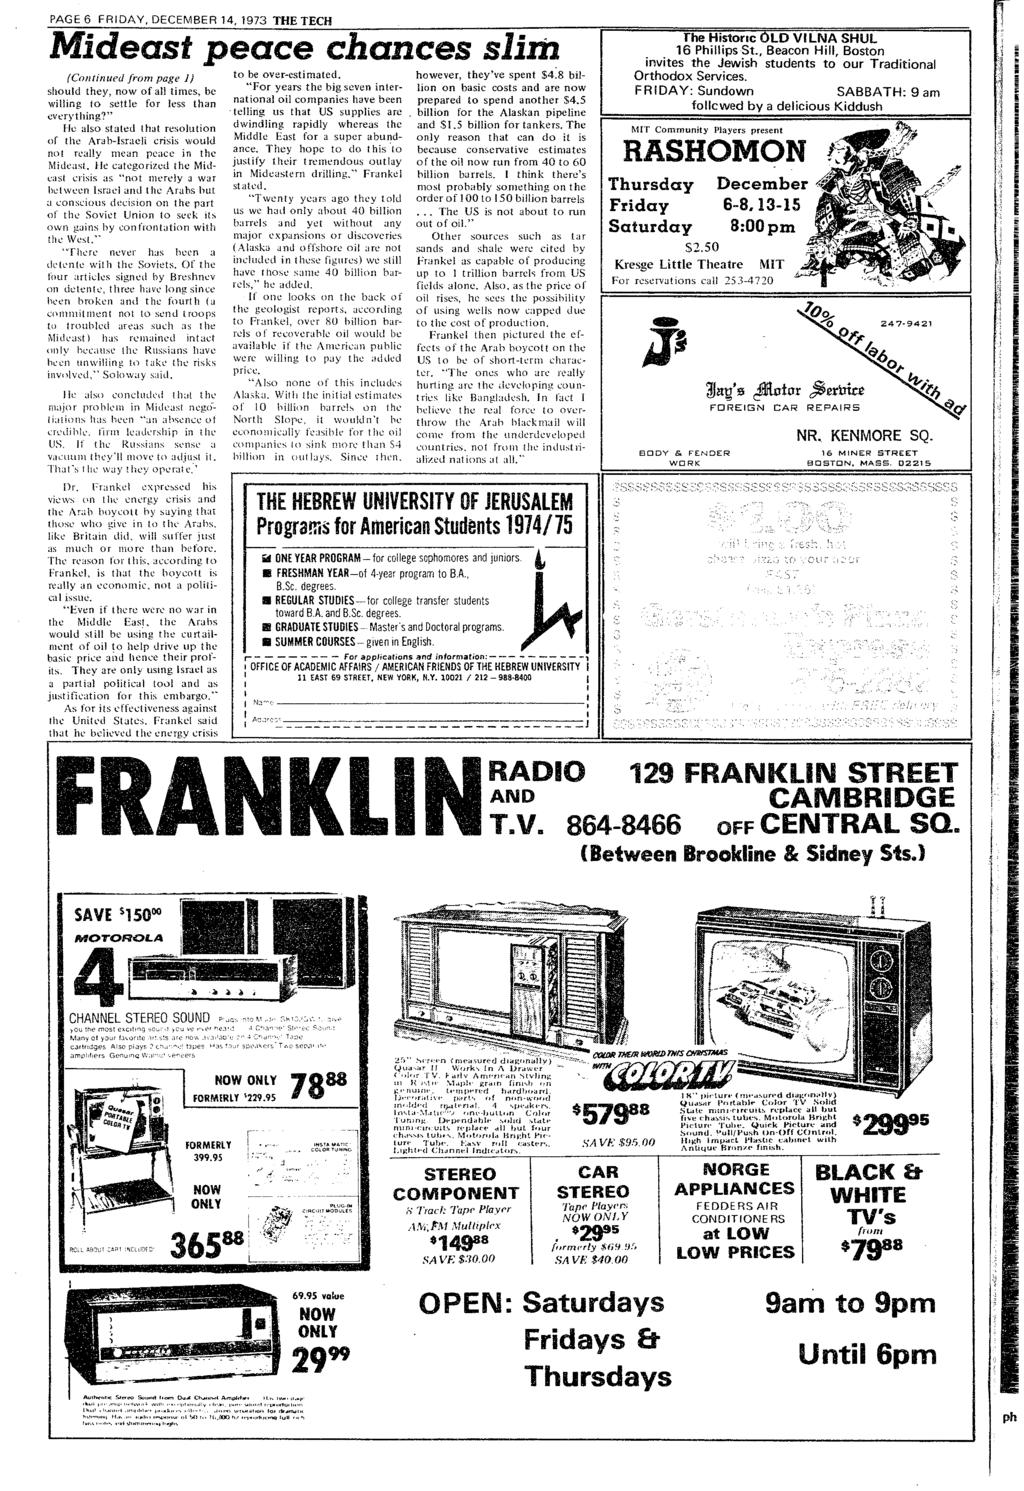 PAGE 6 FRDAY, DECEMBER 14, 1973 THETECH _ Mdeast peace chances slm (Contnued from page 1) should they, now of all tmes, be wllng to settle for less than everythng?